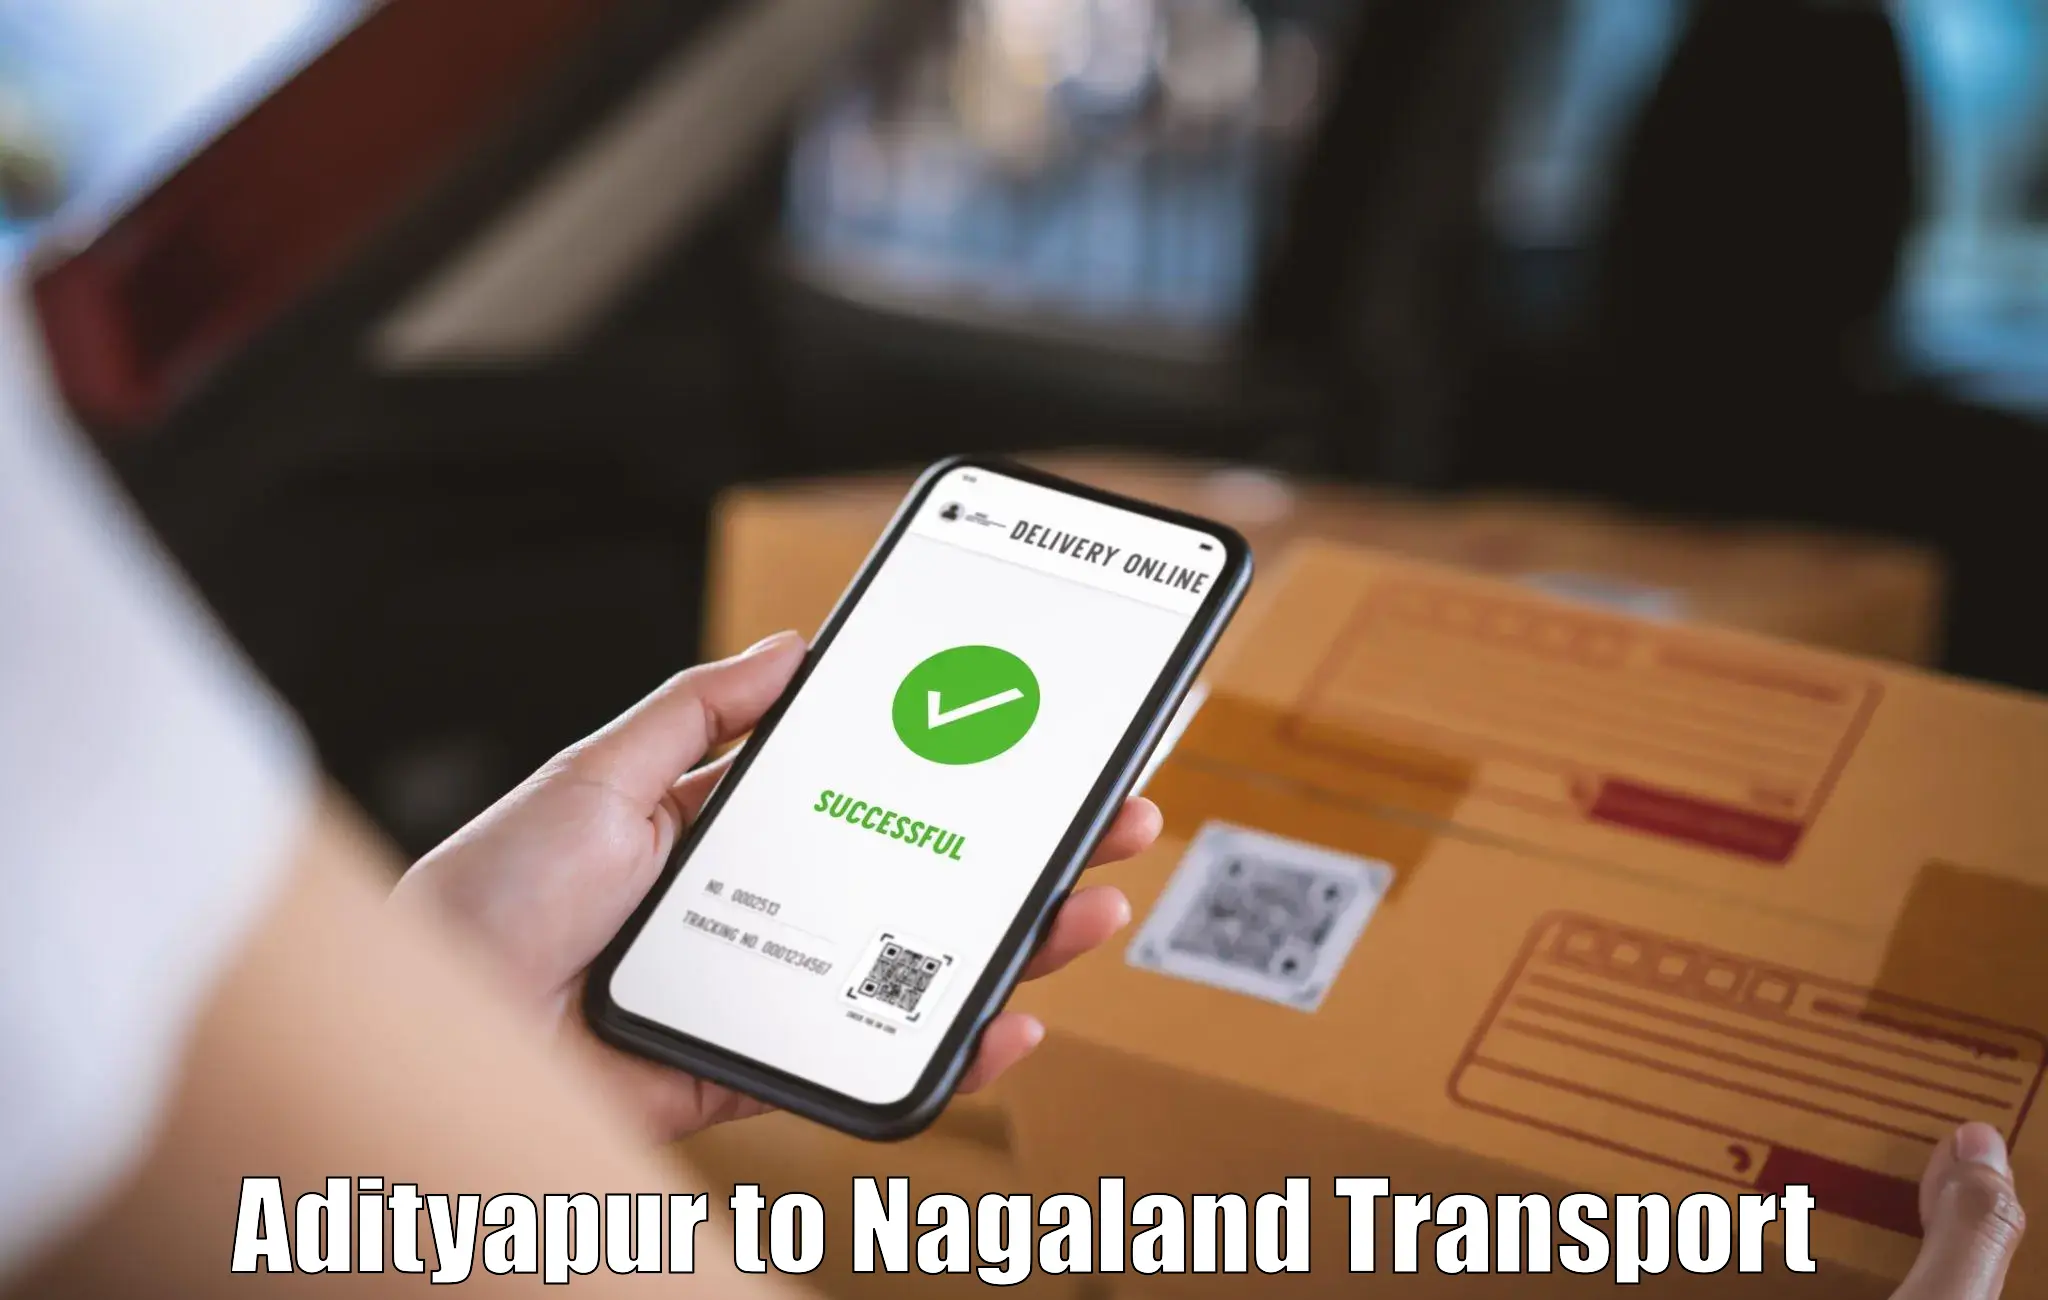 Goods delivery service Adityapur to Mokokchung